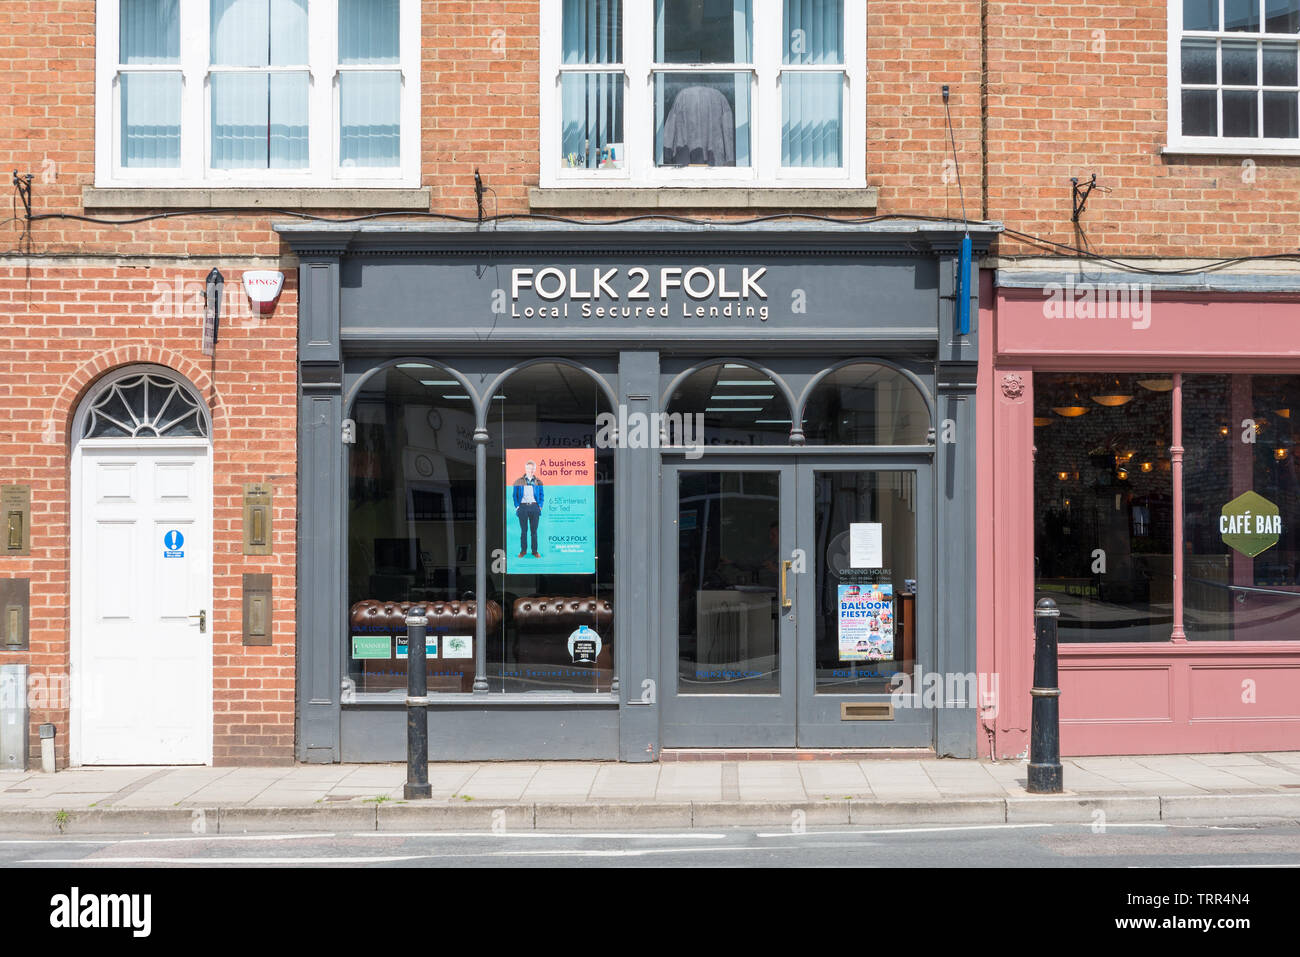 Folk 2 Folk peer-to-peer local secured lending for rural businesses and SMEs in Tewkesbury, Gloucestershire, UK Stock Photo